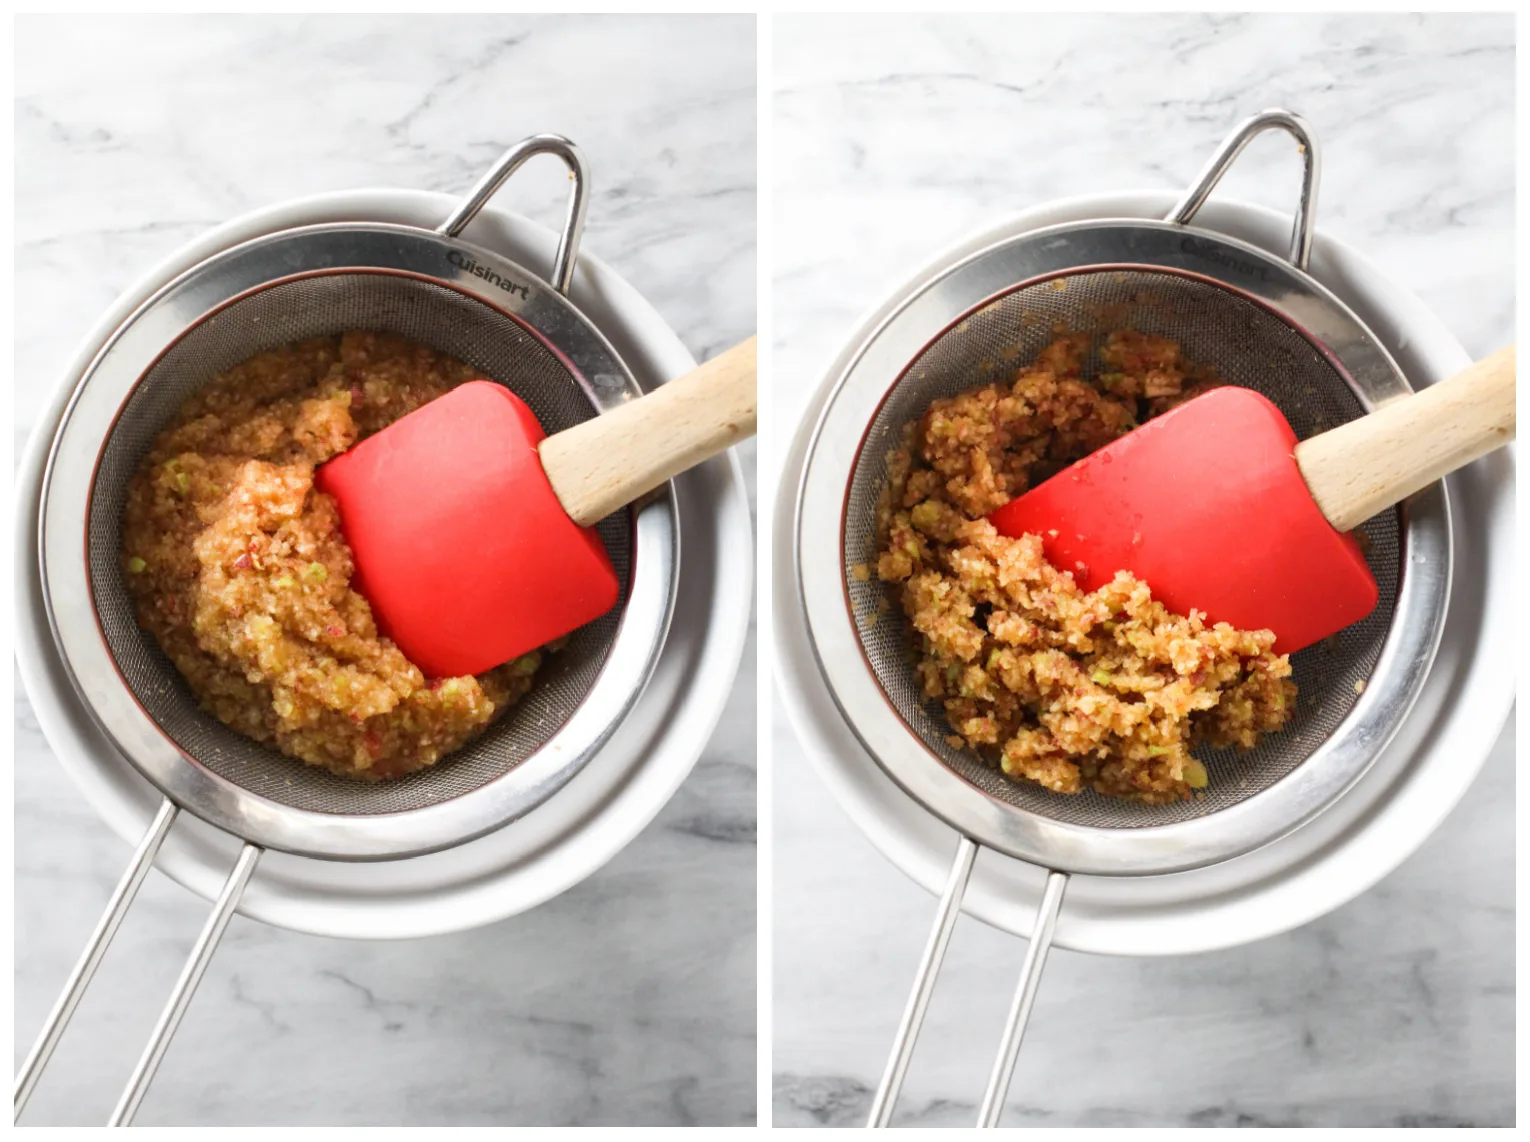 Collage of two images side-by-side. On the left, apple pulp in a strainer being pressed with a rubber spatula. On the right, dry pulp in a strainer with rupper spatula.